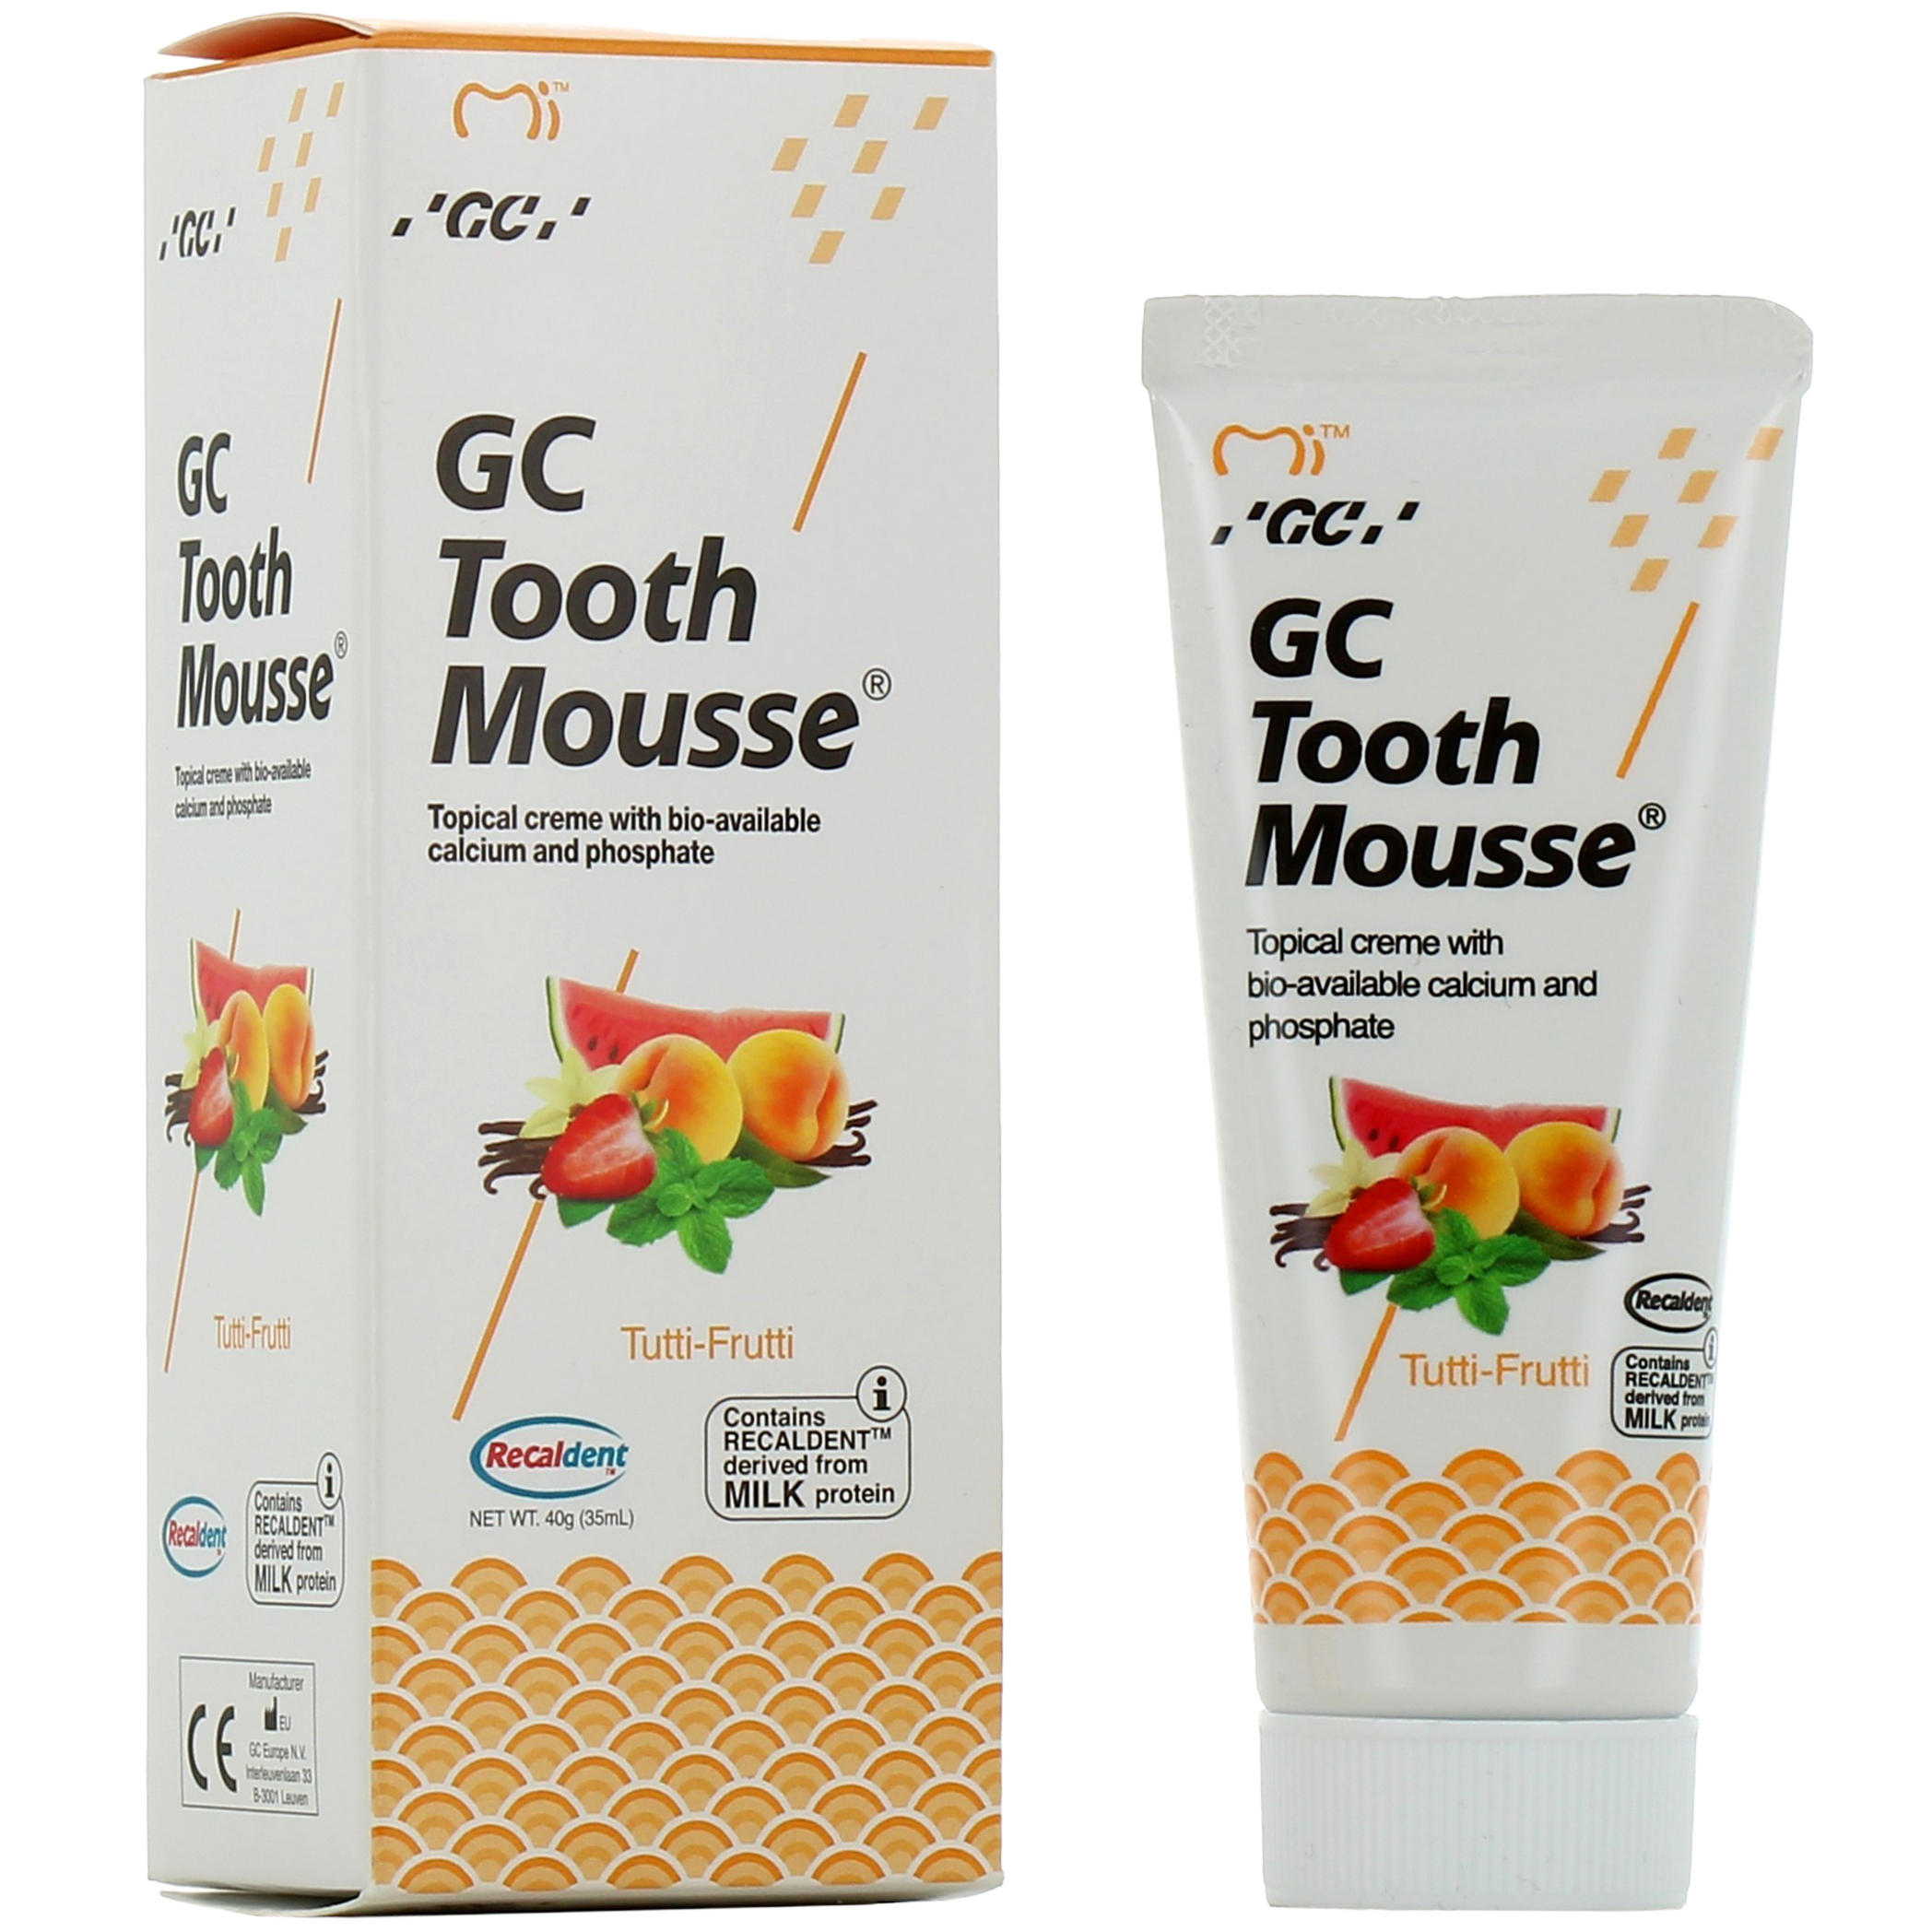 GC Tooth Mousse soin dentaire reminéralisant